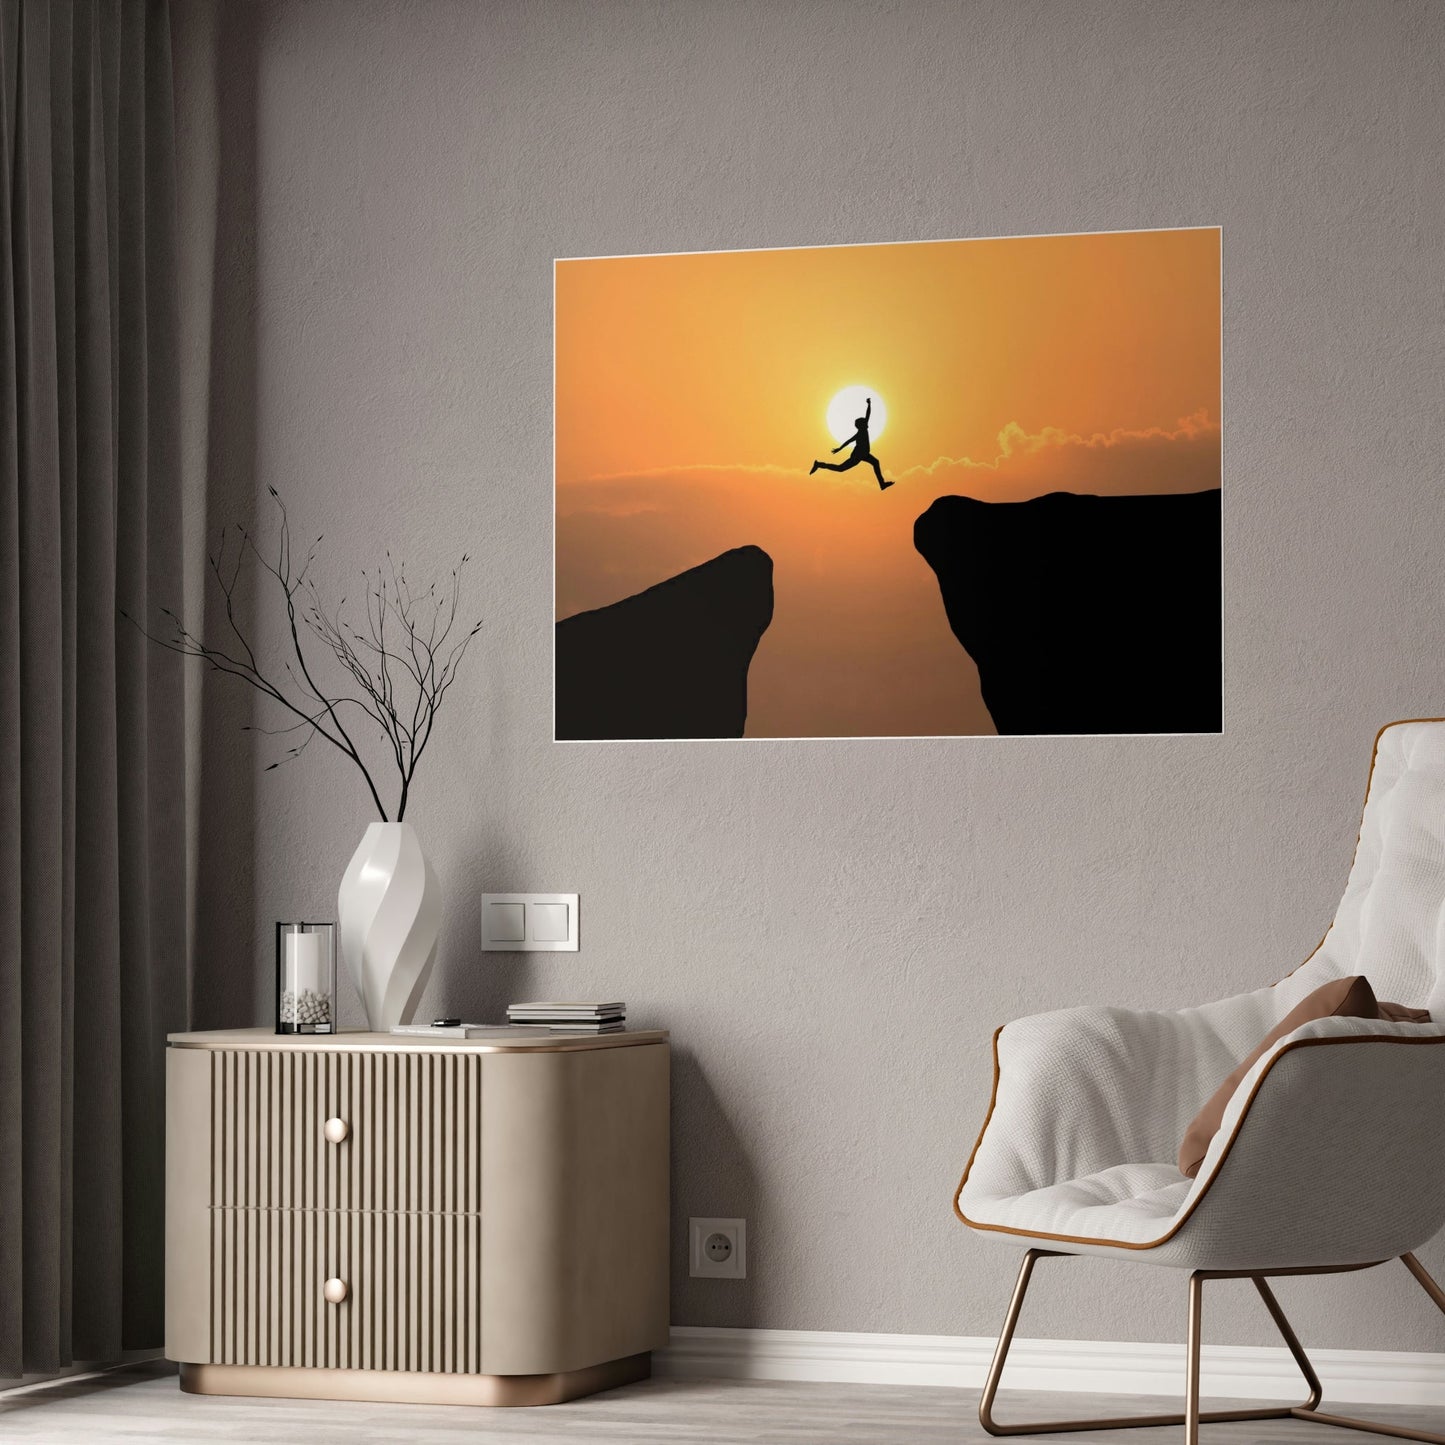 The Cliff's Edge: Dramatic Canvas Print for Statement Decor